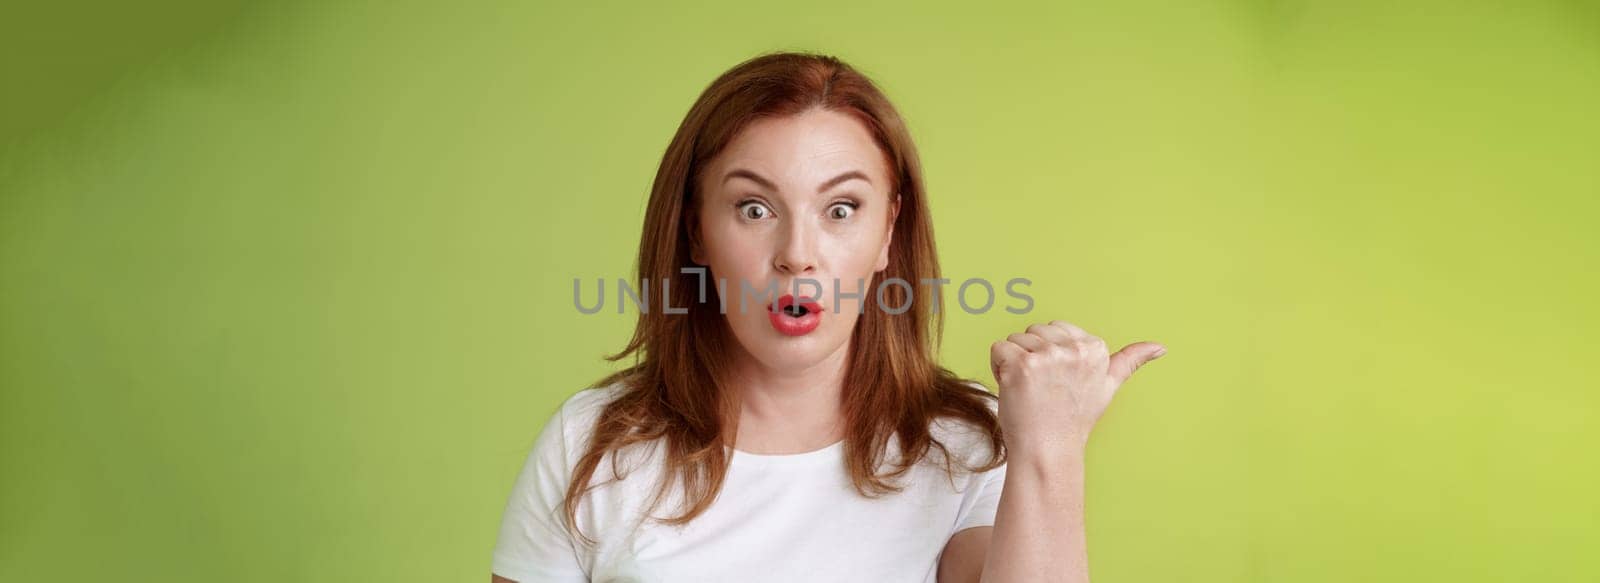 Close-up surprised amused redhead middle-aged housewife. folding lips say wow impressed stare camera questioned ambushed pointing left thumb astonished wondering if promo true green background.